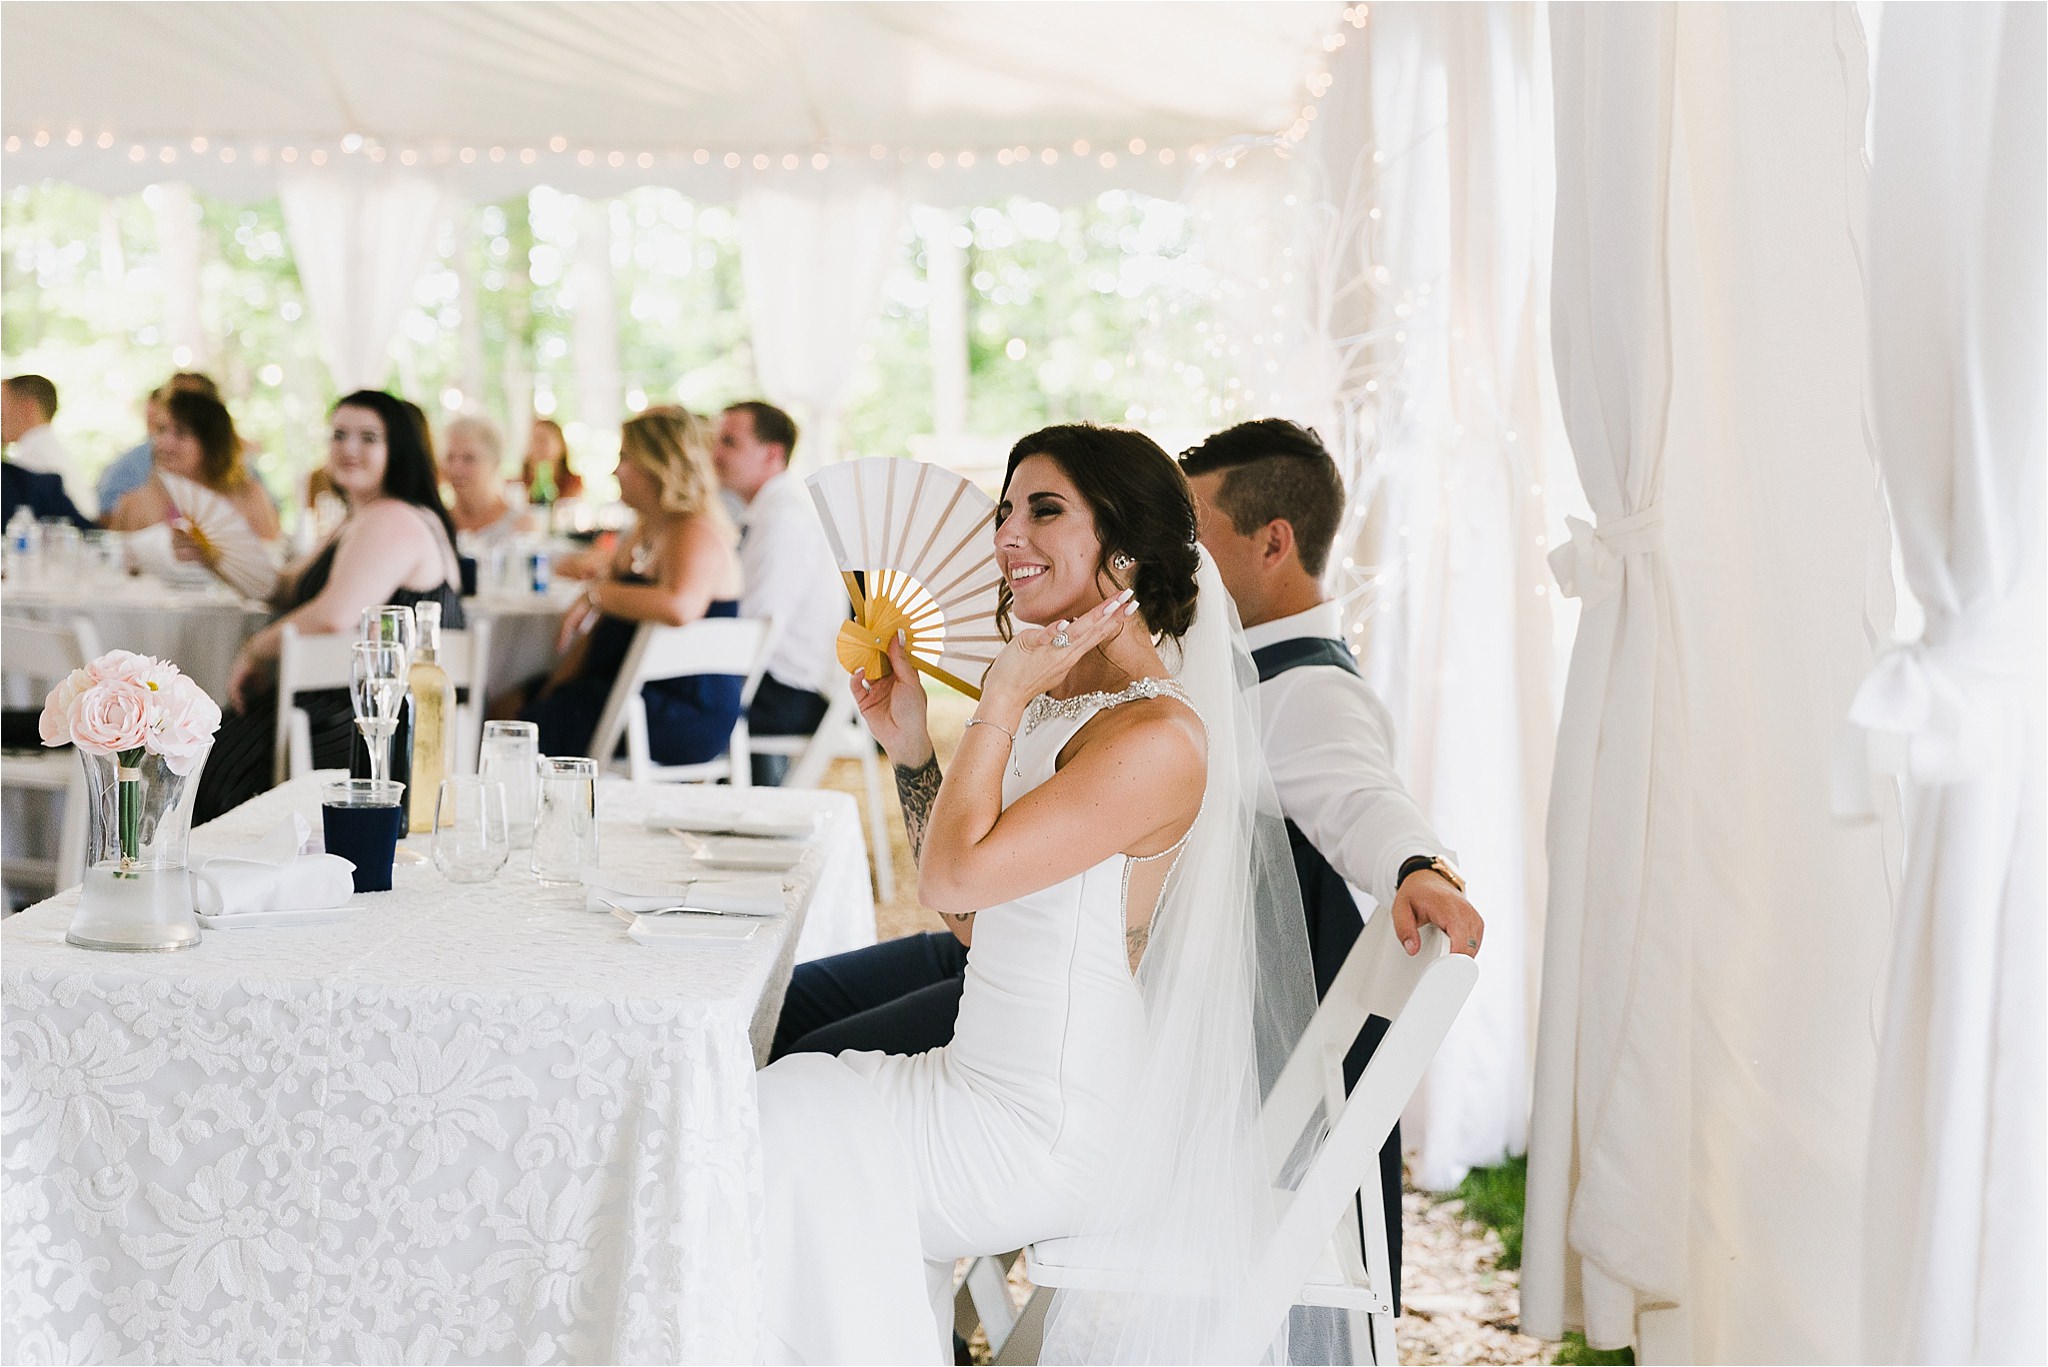 Sonia V Photography, The Clearing reception wedding venue, outdoor tent dinner, bride and groom seated at table